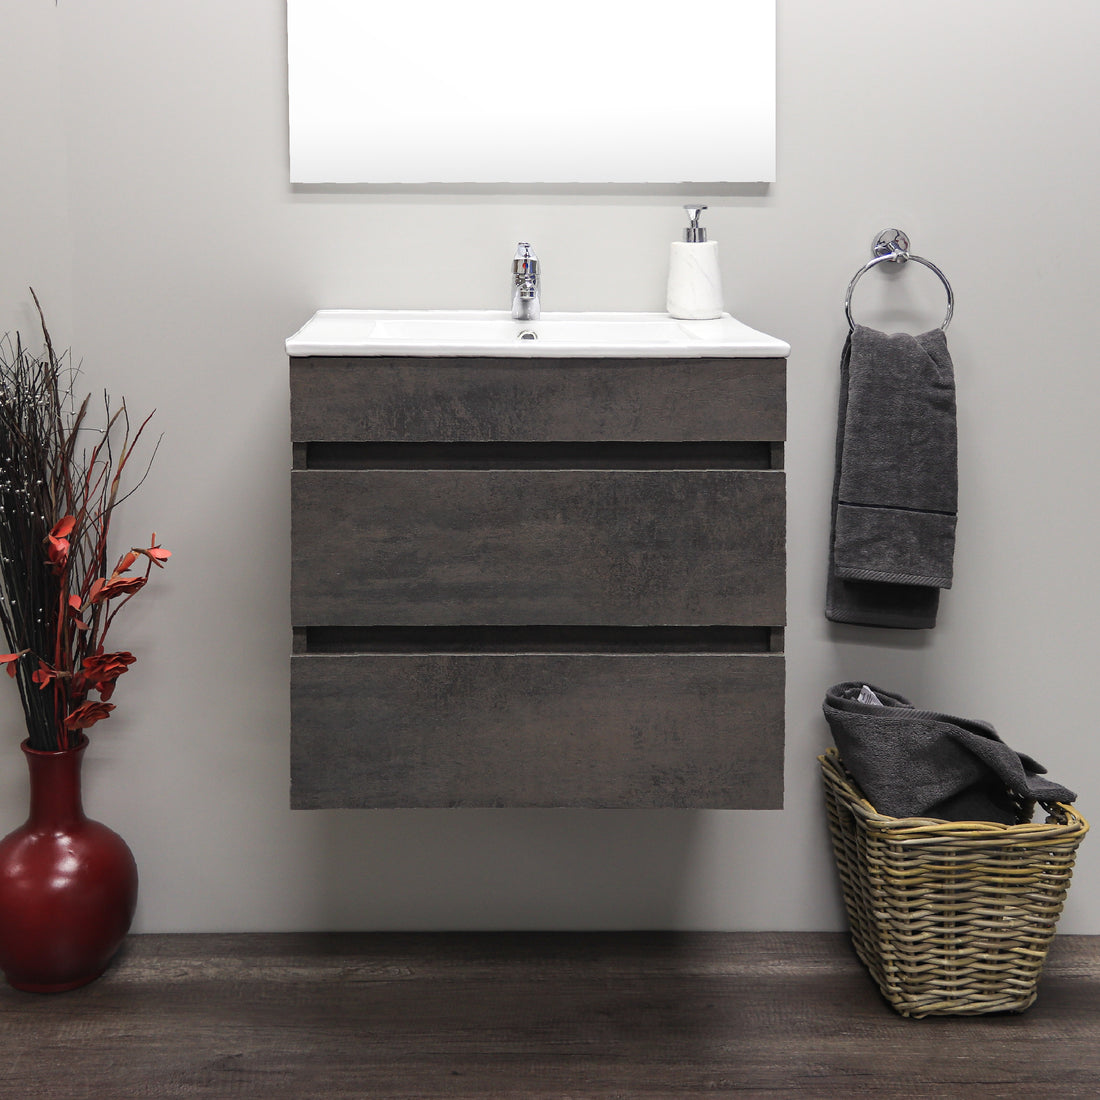 Denver Furnitures Stylo Bathroom Vanity Cabinet: Sprucing Up Your Bathroom with Style and Affordability